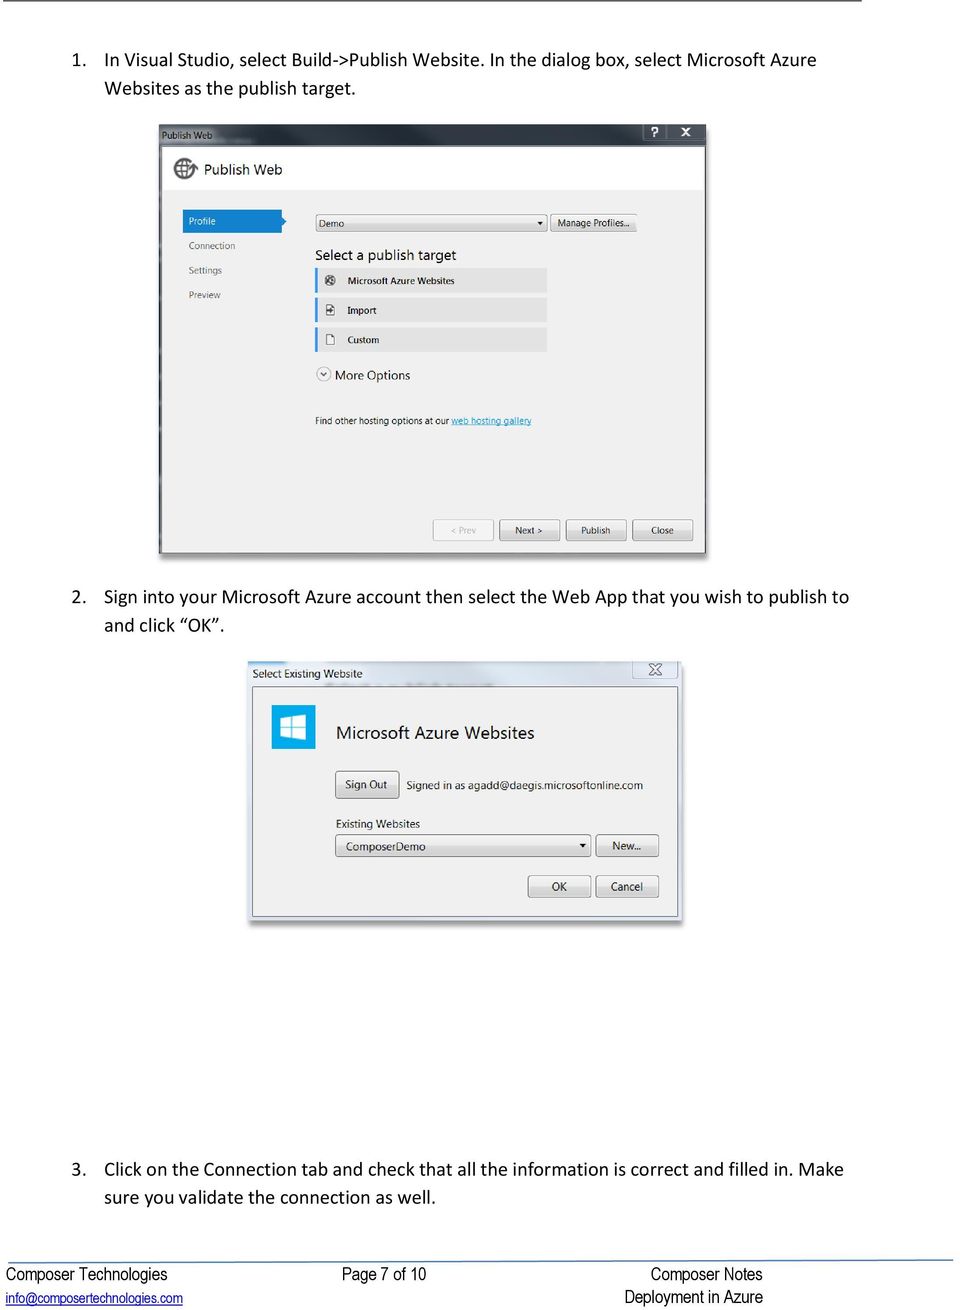 Sign into your Microsoft Azure account then select the Web App that you wish to publish to and click OK.